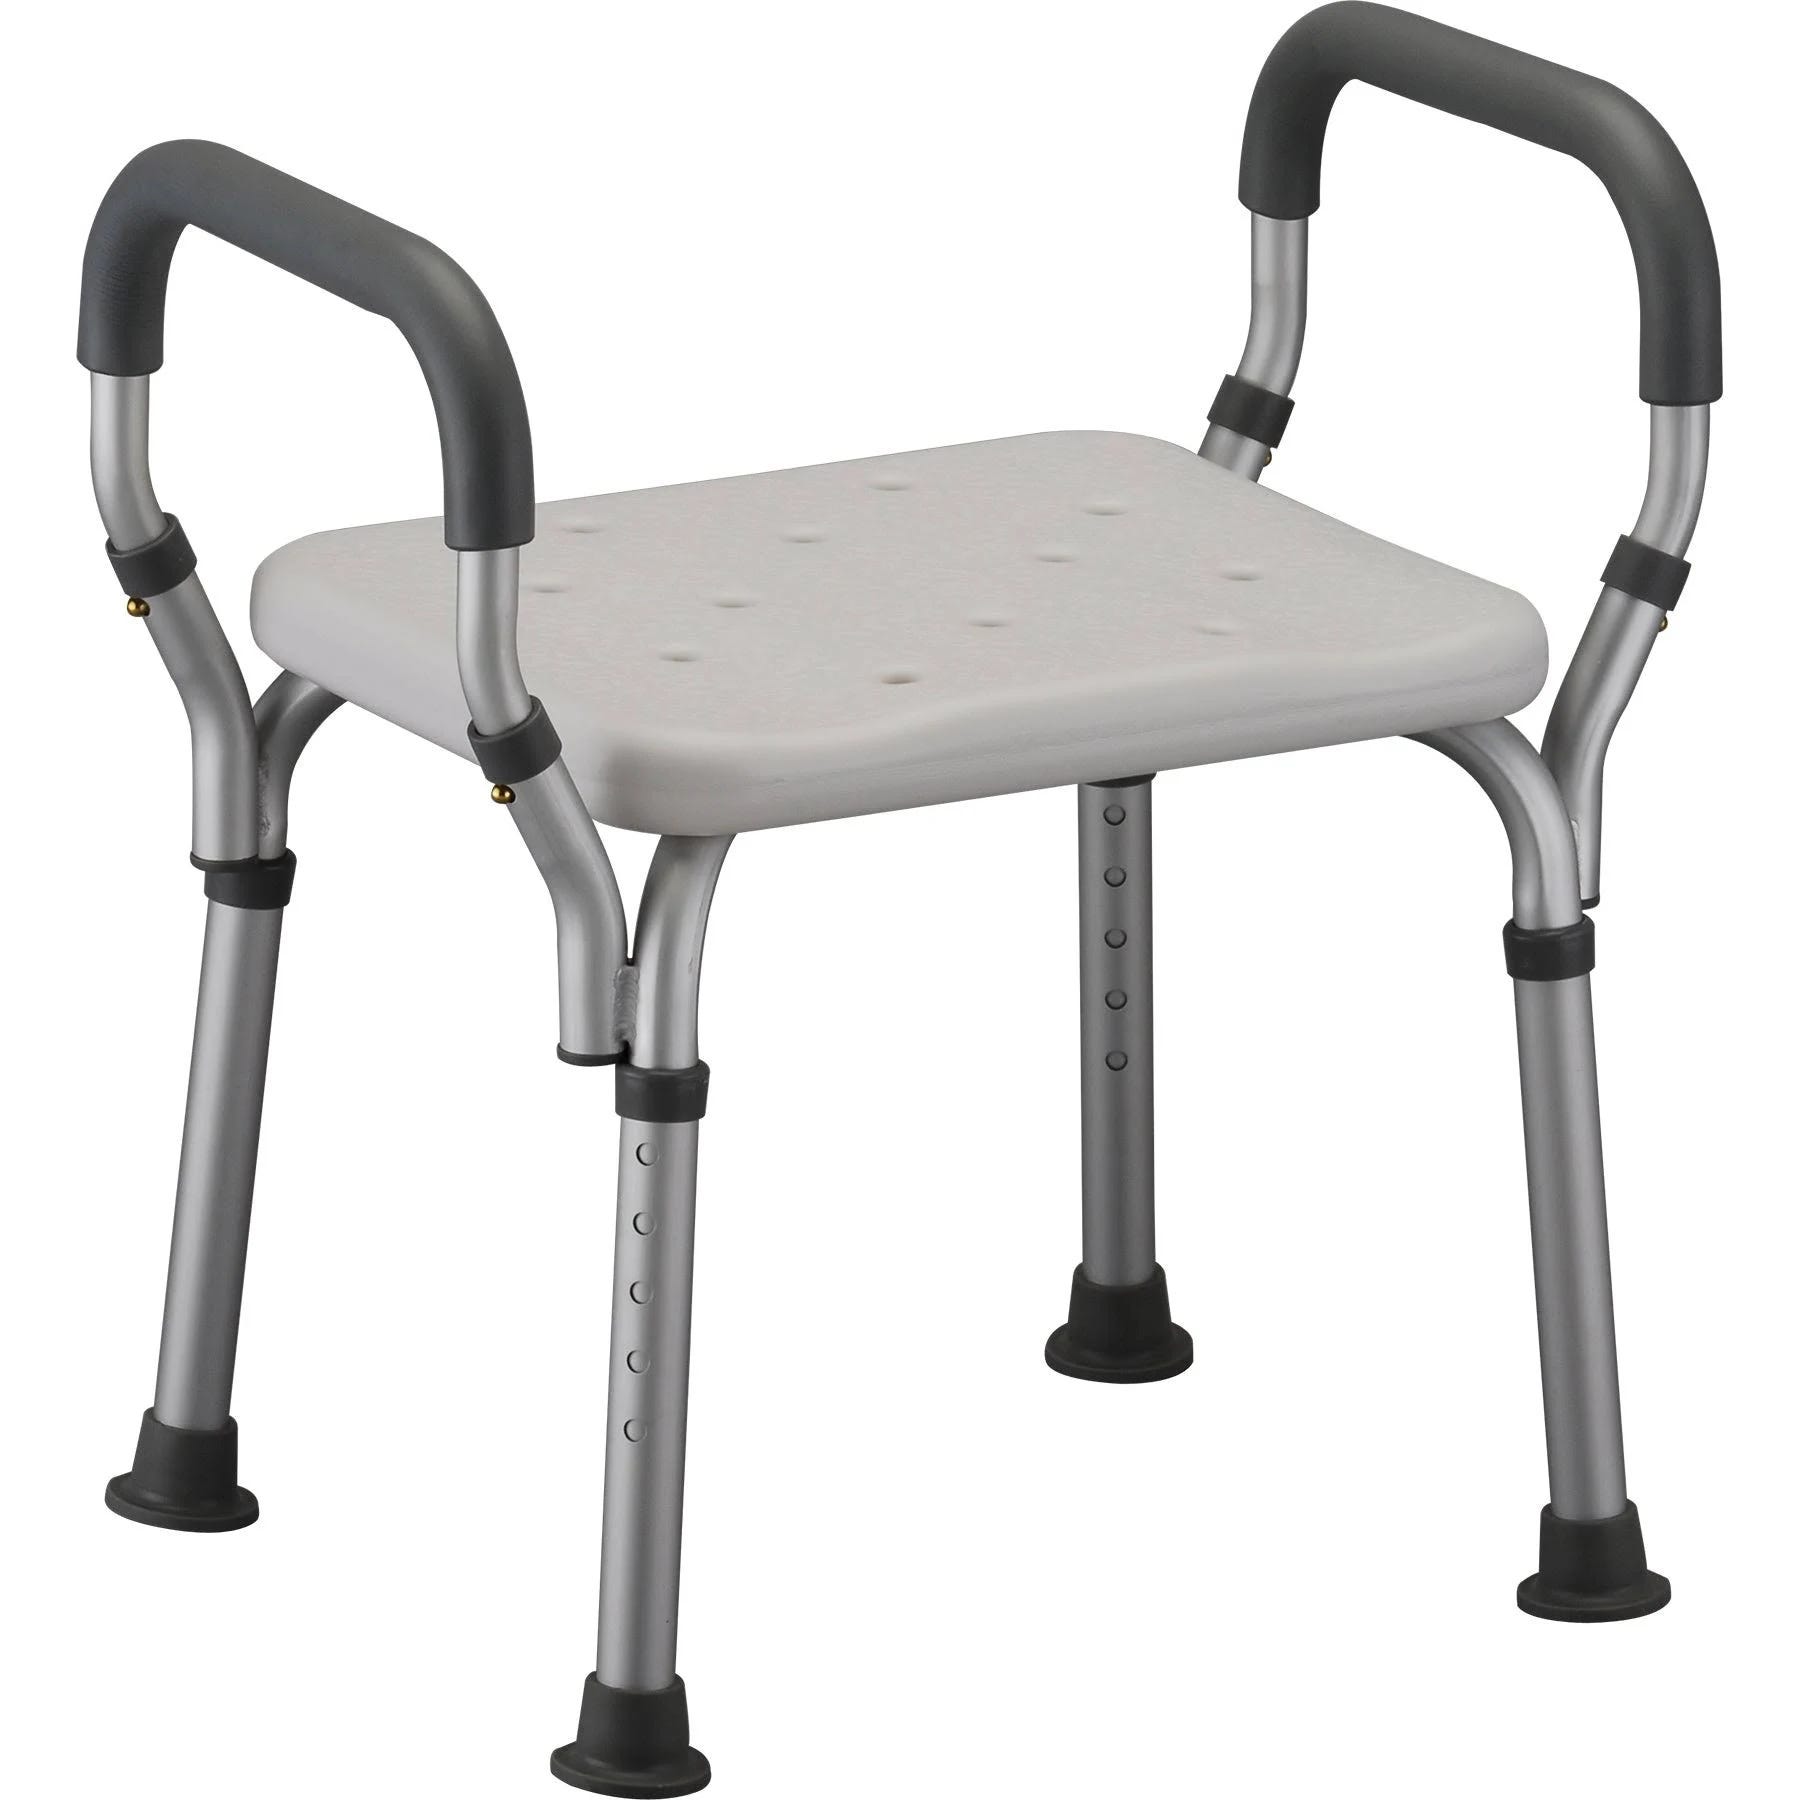 Lightweight Aluminum Bath Seat with Arm Support and Skid-Resistant Tips | Image